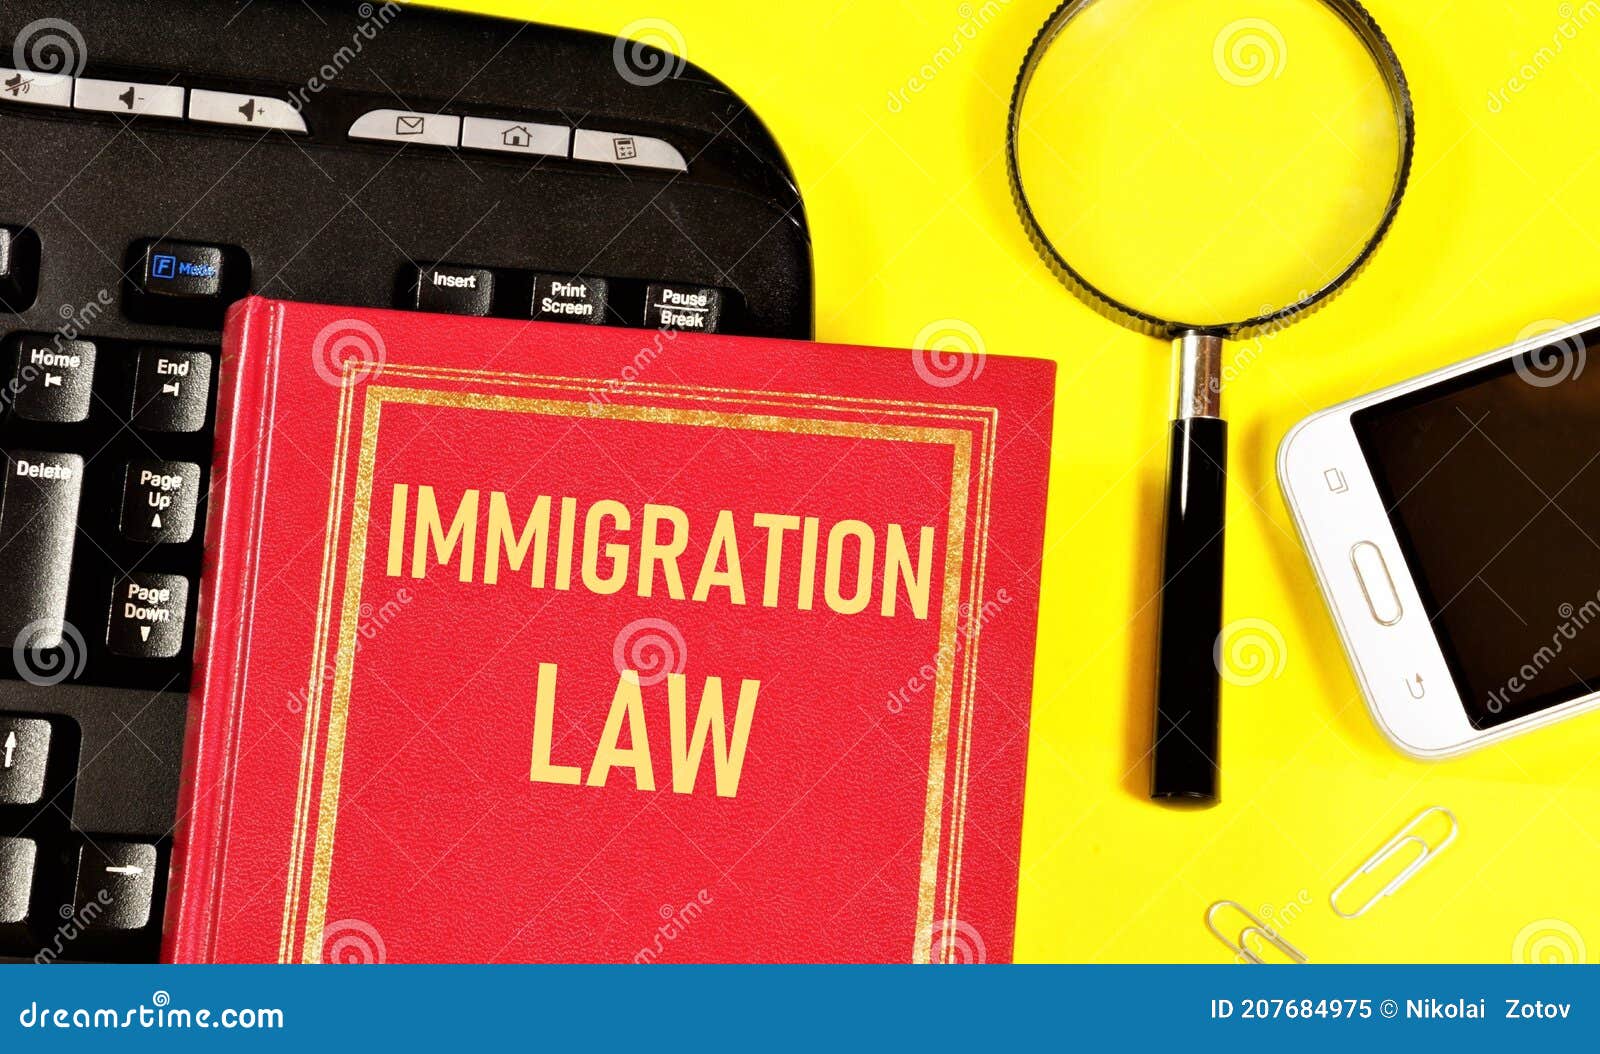 immigration law. regulates the movement of a person and their change of place of residence